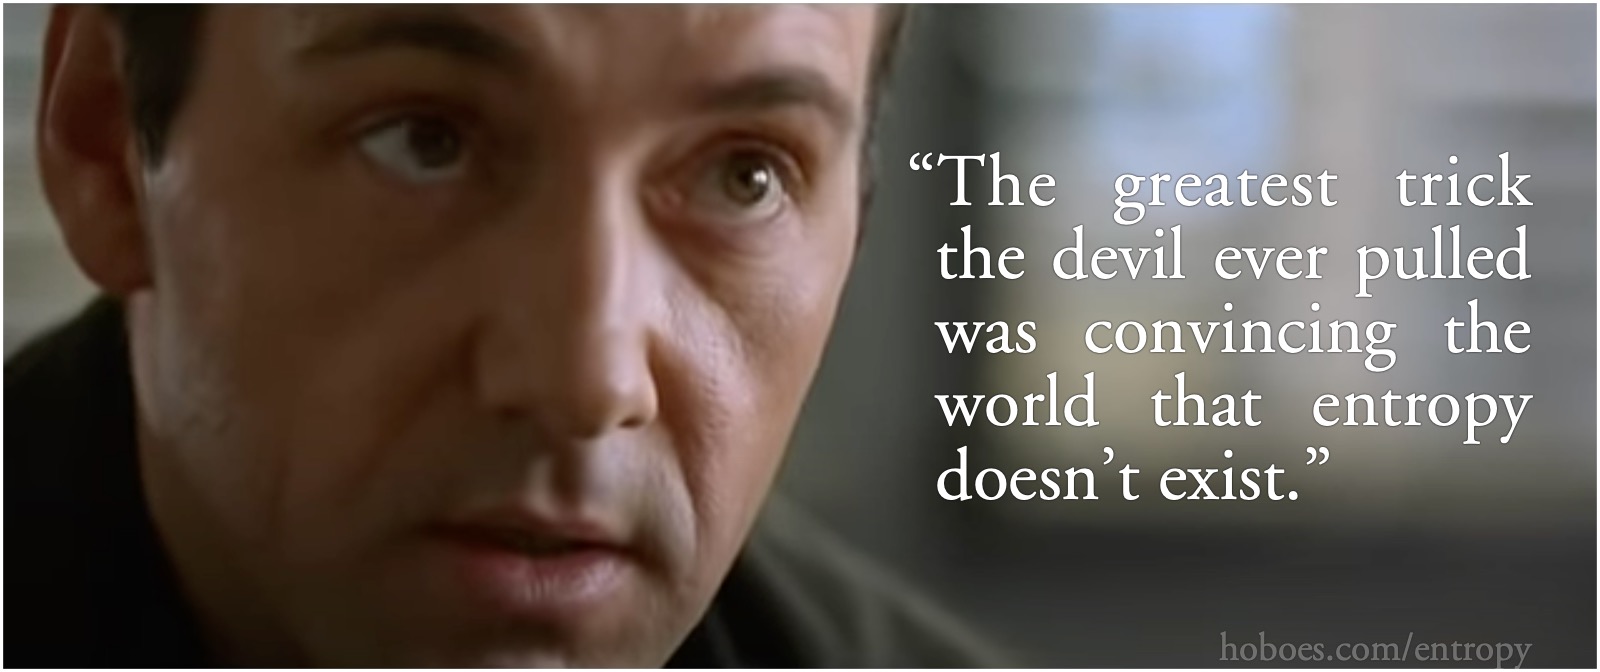 Keyser Söze: Entropy doesn’t exist: “The greatest trick the devil ever pulled was convincing the world that entropy doesn’t exist.”; Kevin Spacey; entropy